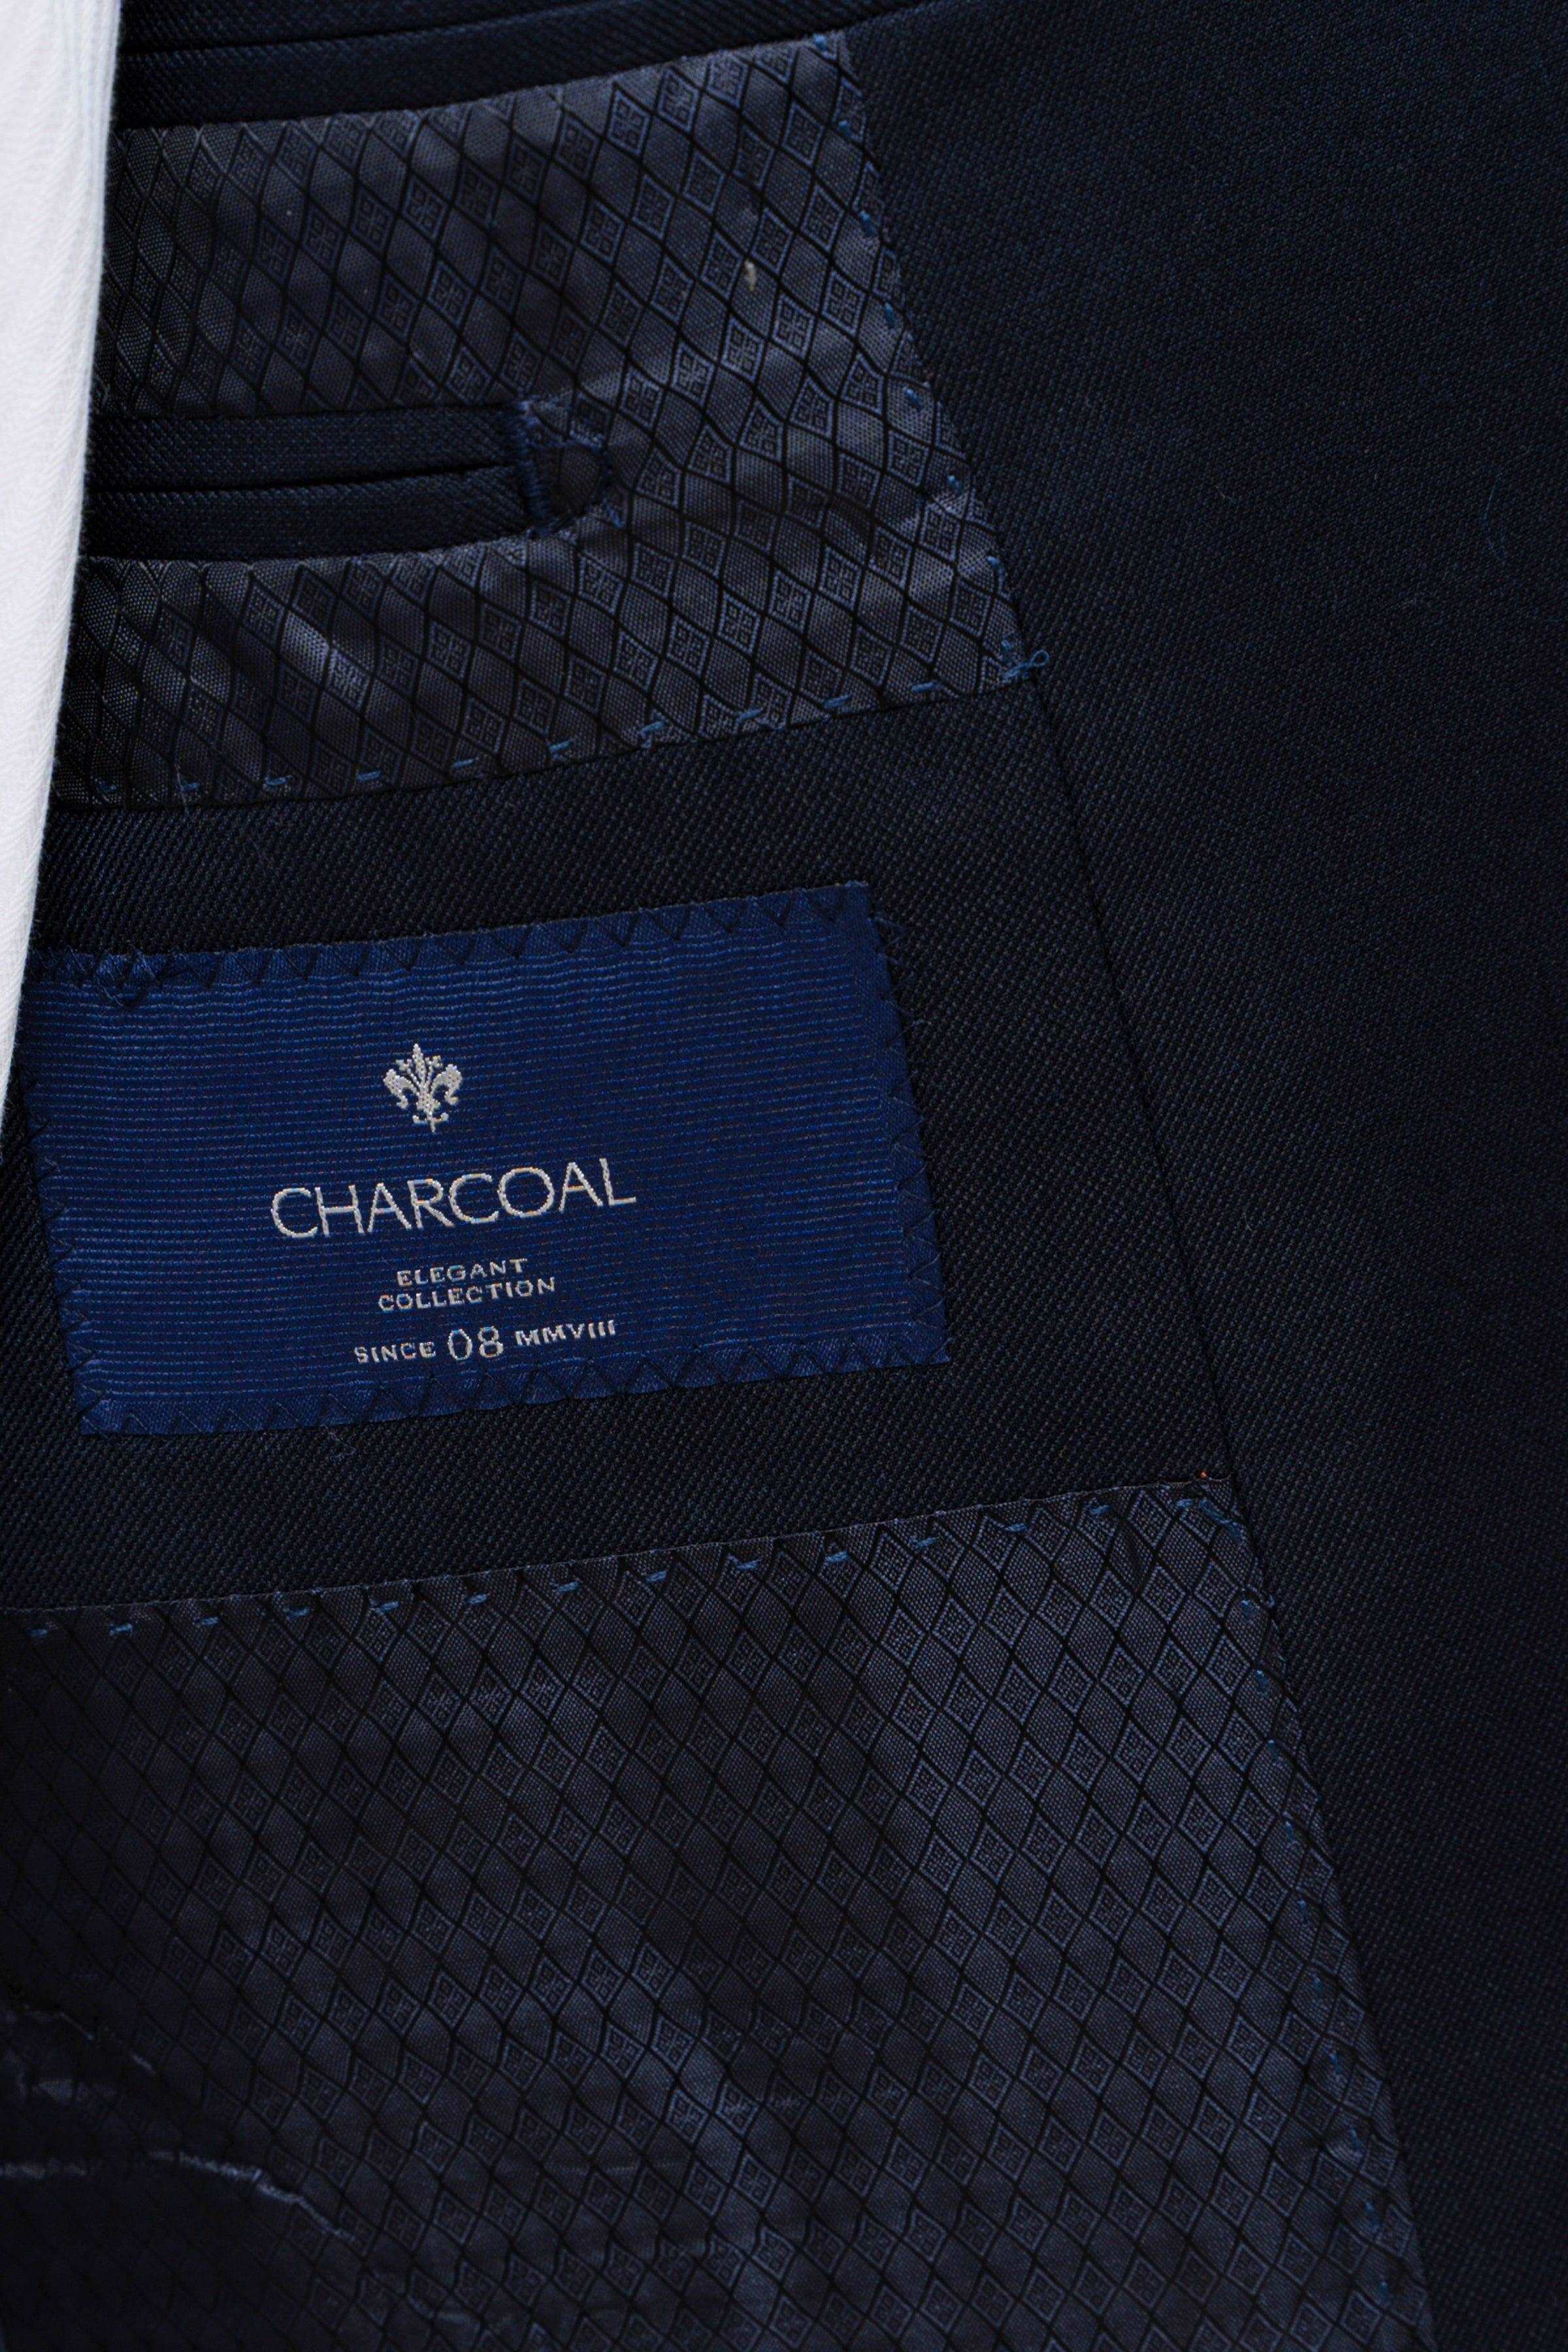 2 PIECE SUIT SLIM FIT DARK NAVY at Charcoal Clothing